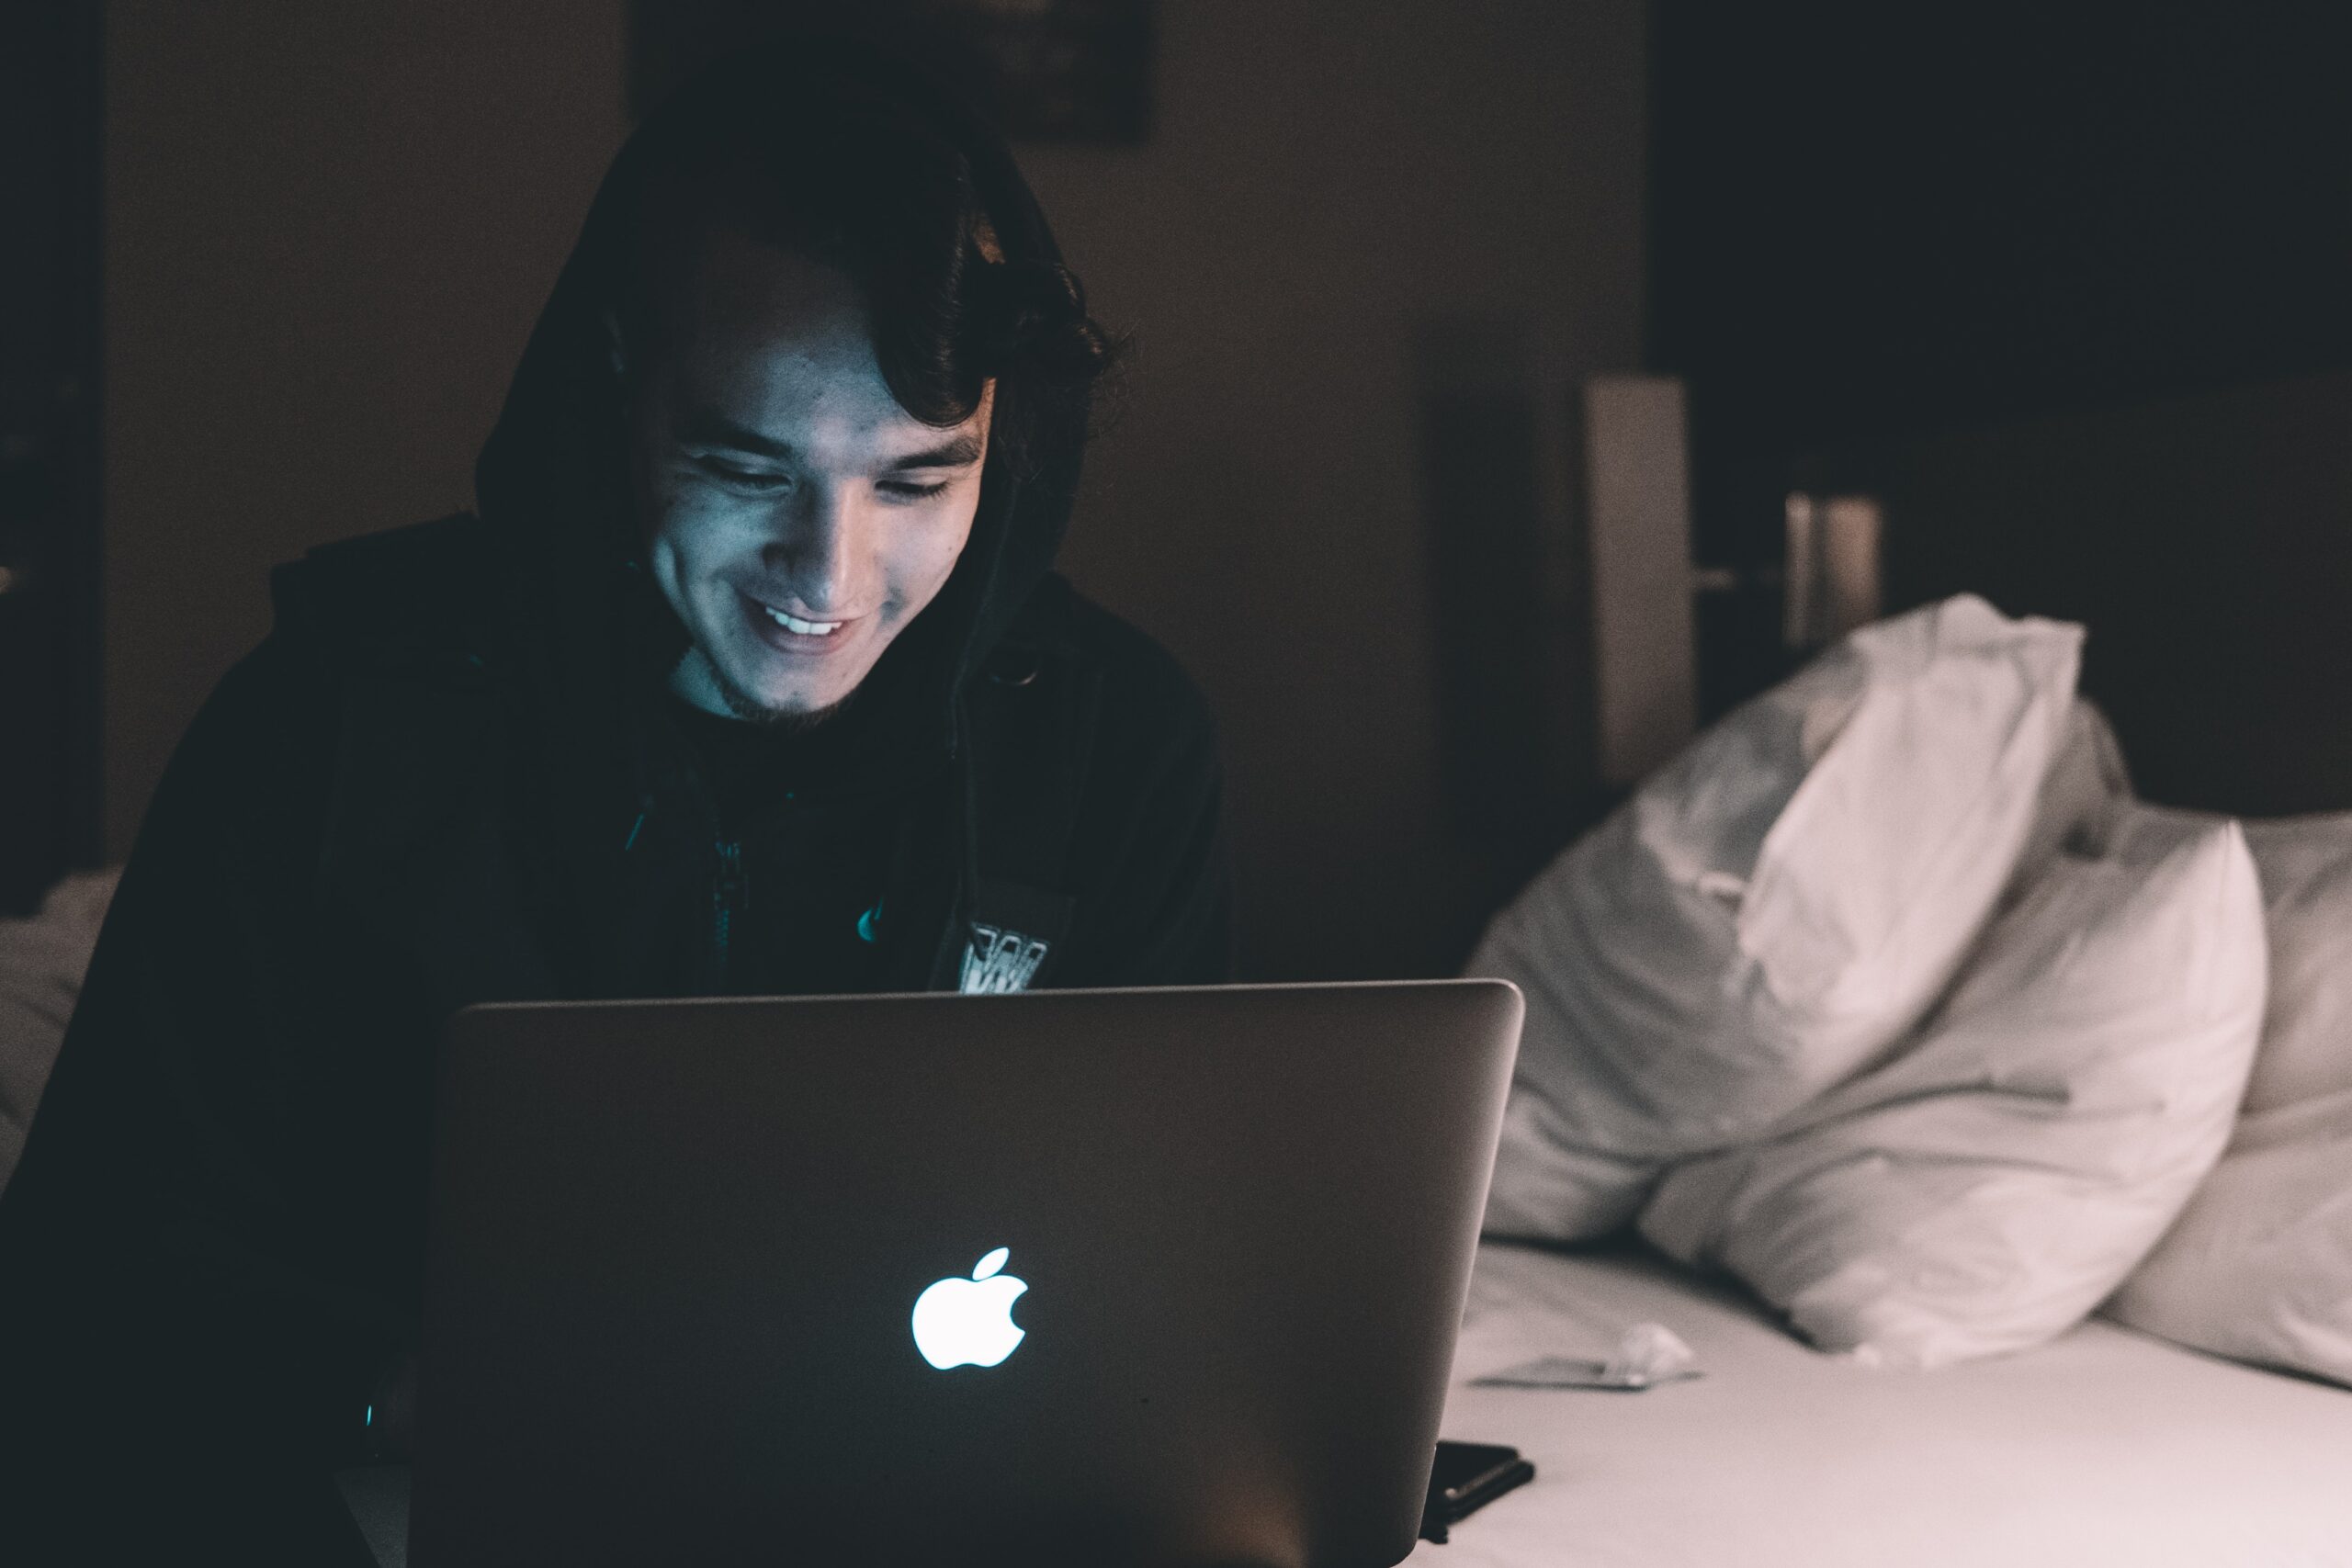 A young person uses their laptop in bed